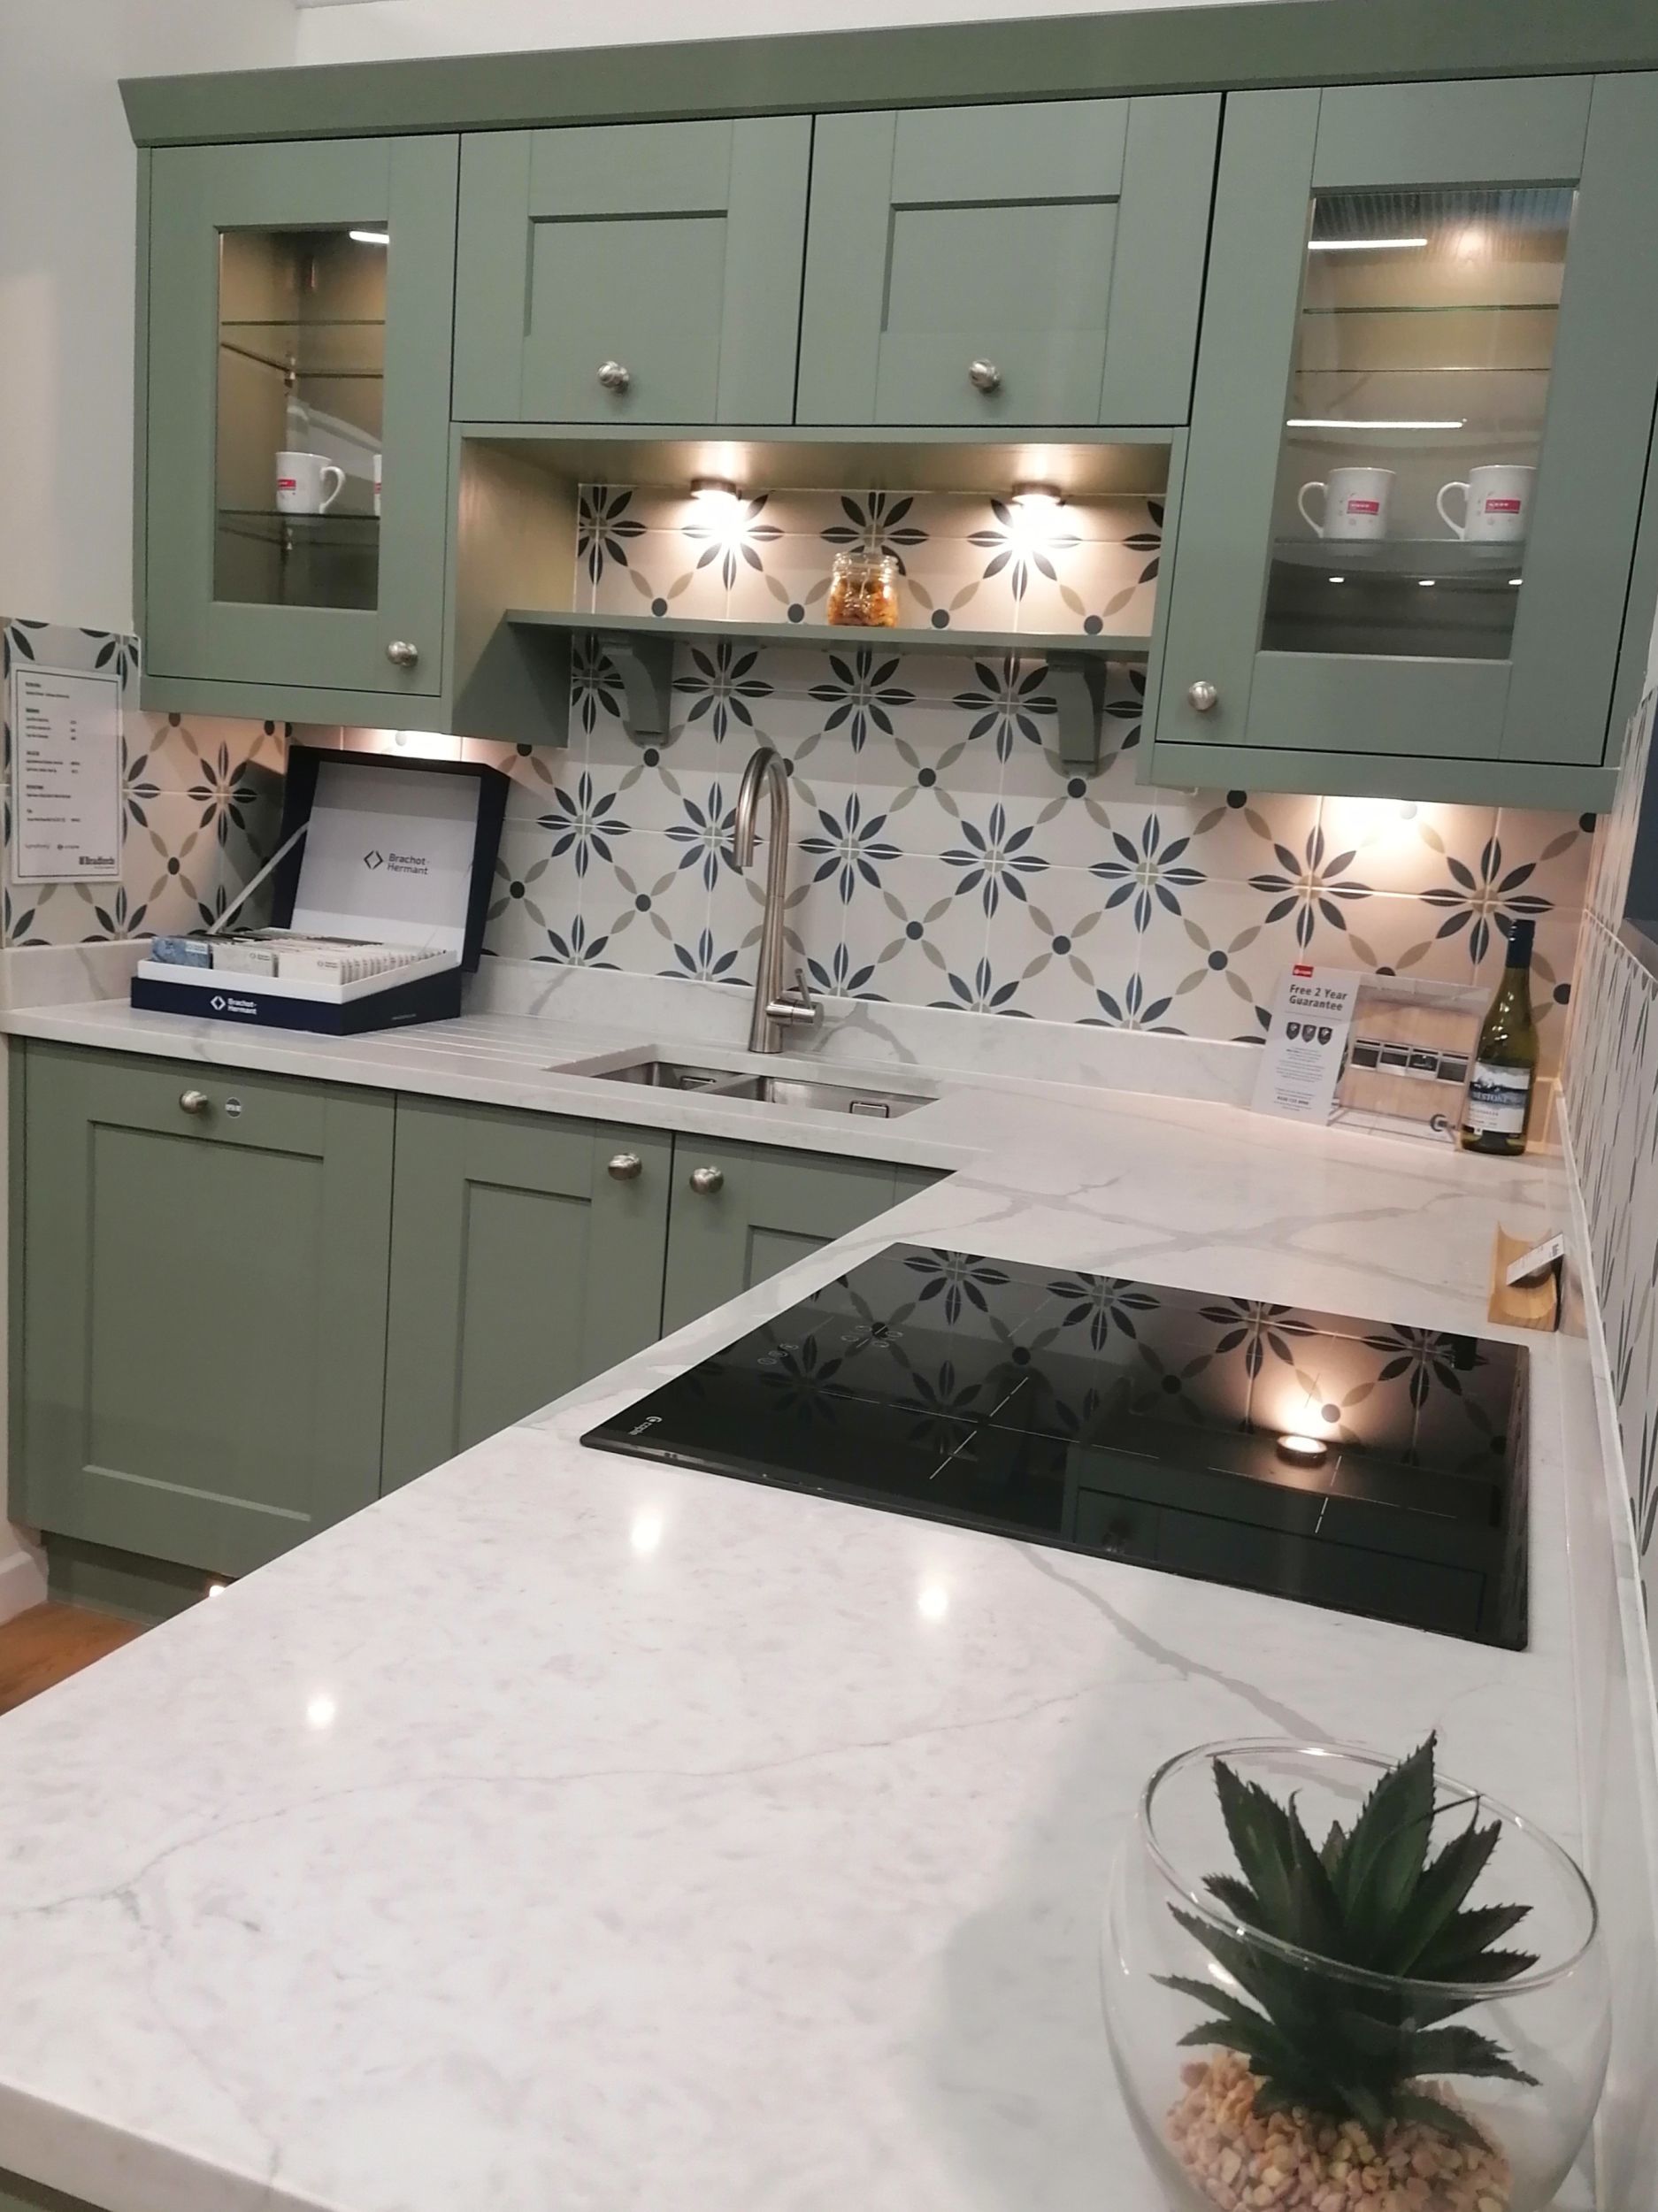 An example of the Classic kitchen collection